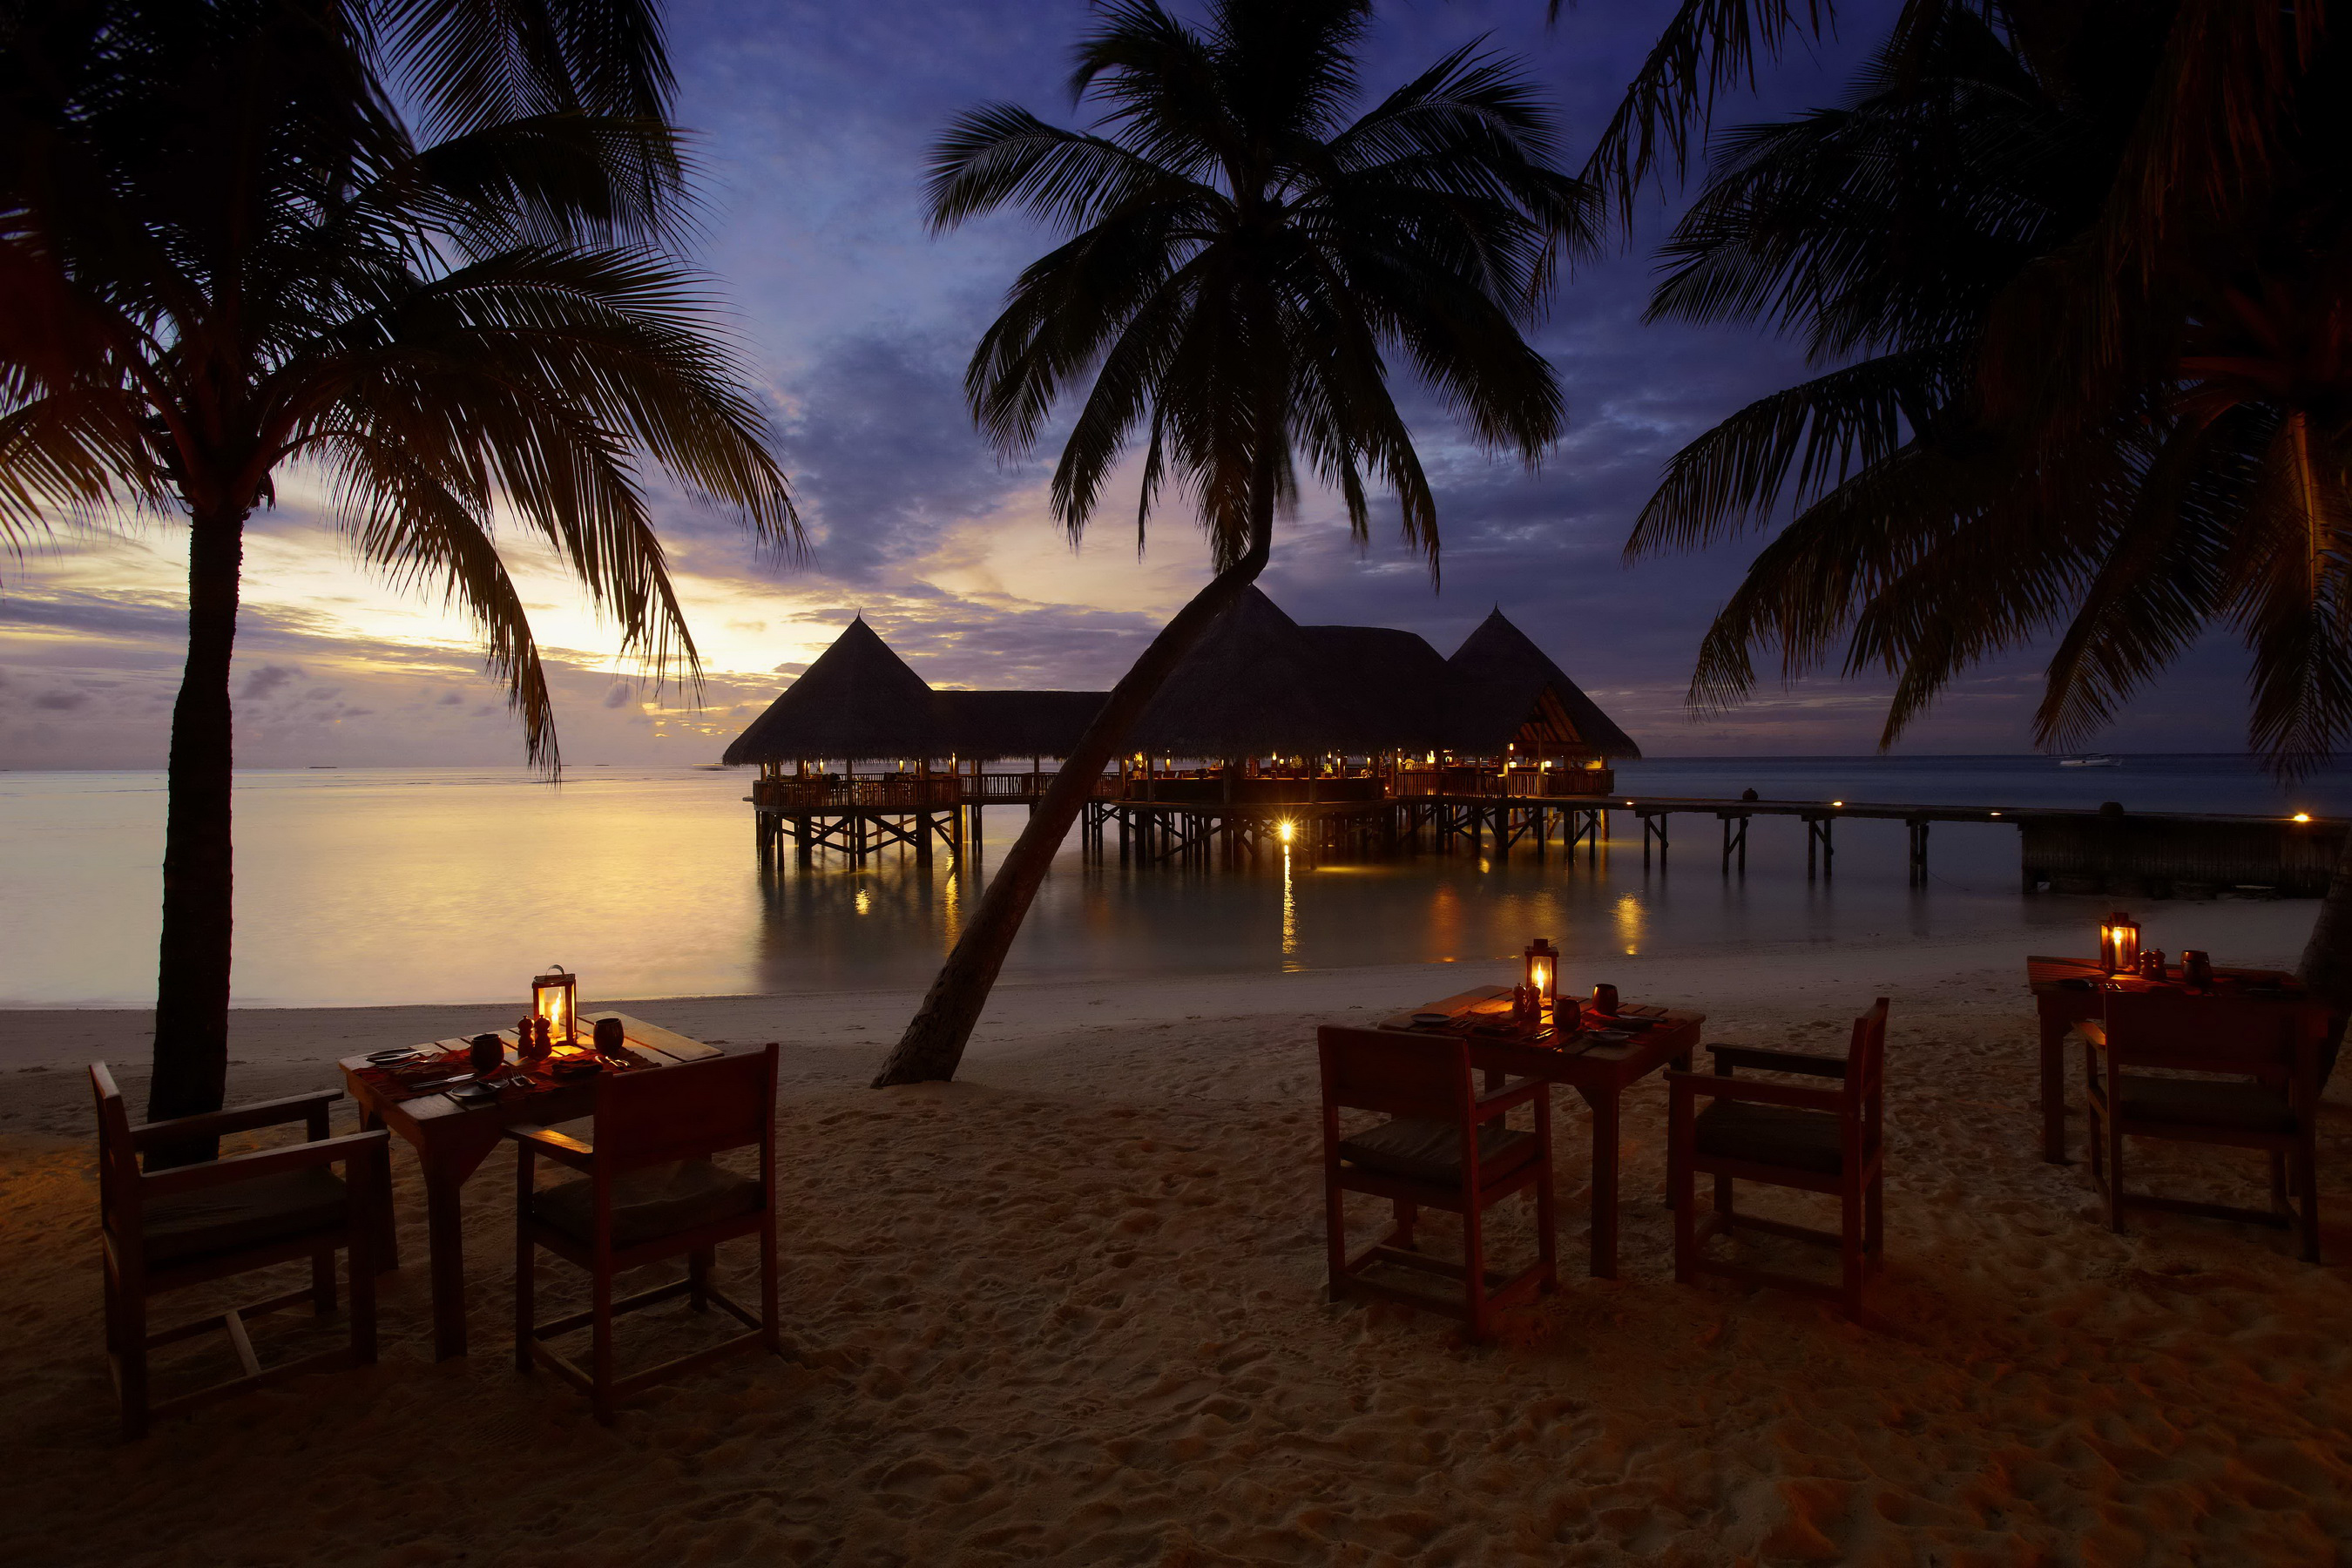 evening, maldives, beach, bungalow, photography, holiday, chair, horizon, palm tree, table